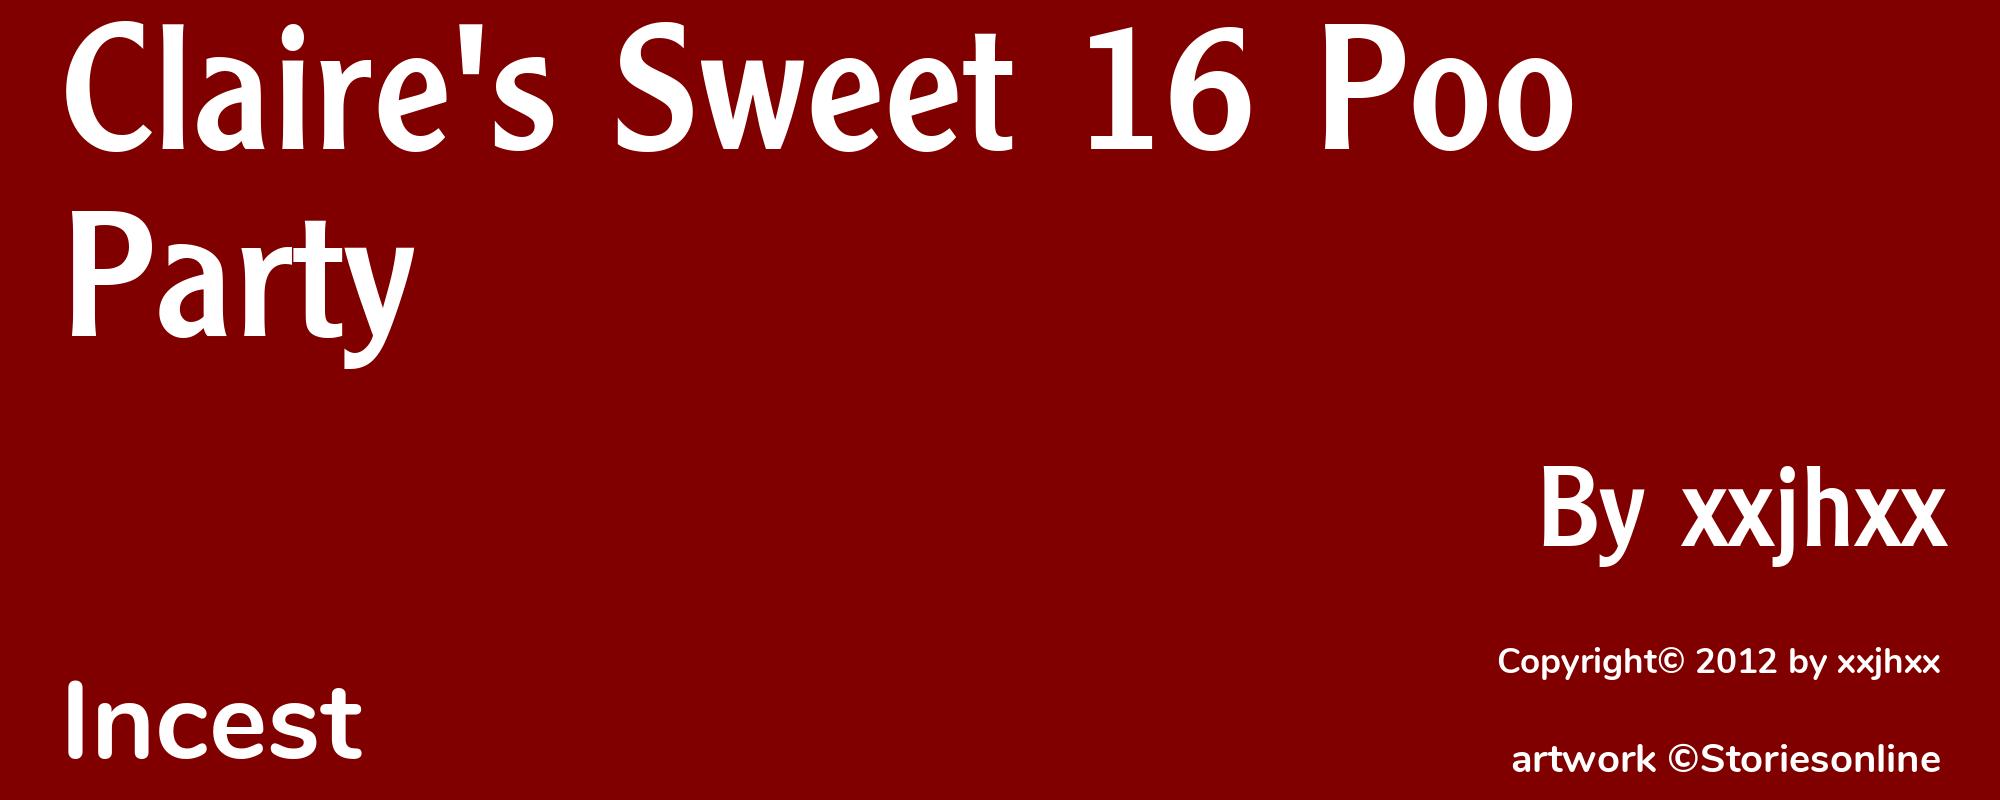 Claire's Sweet 16 Poo Party - Cover